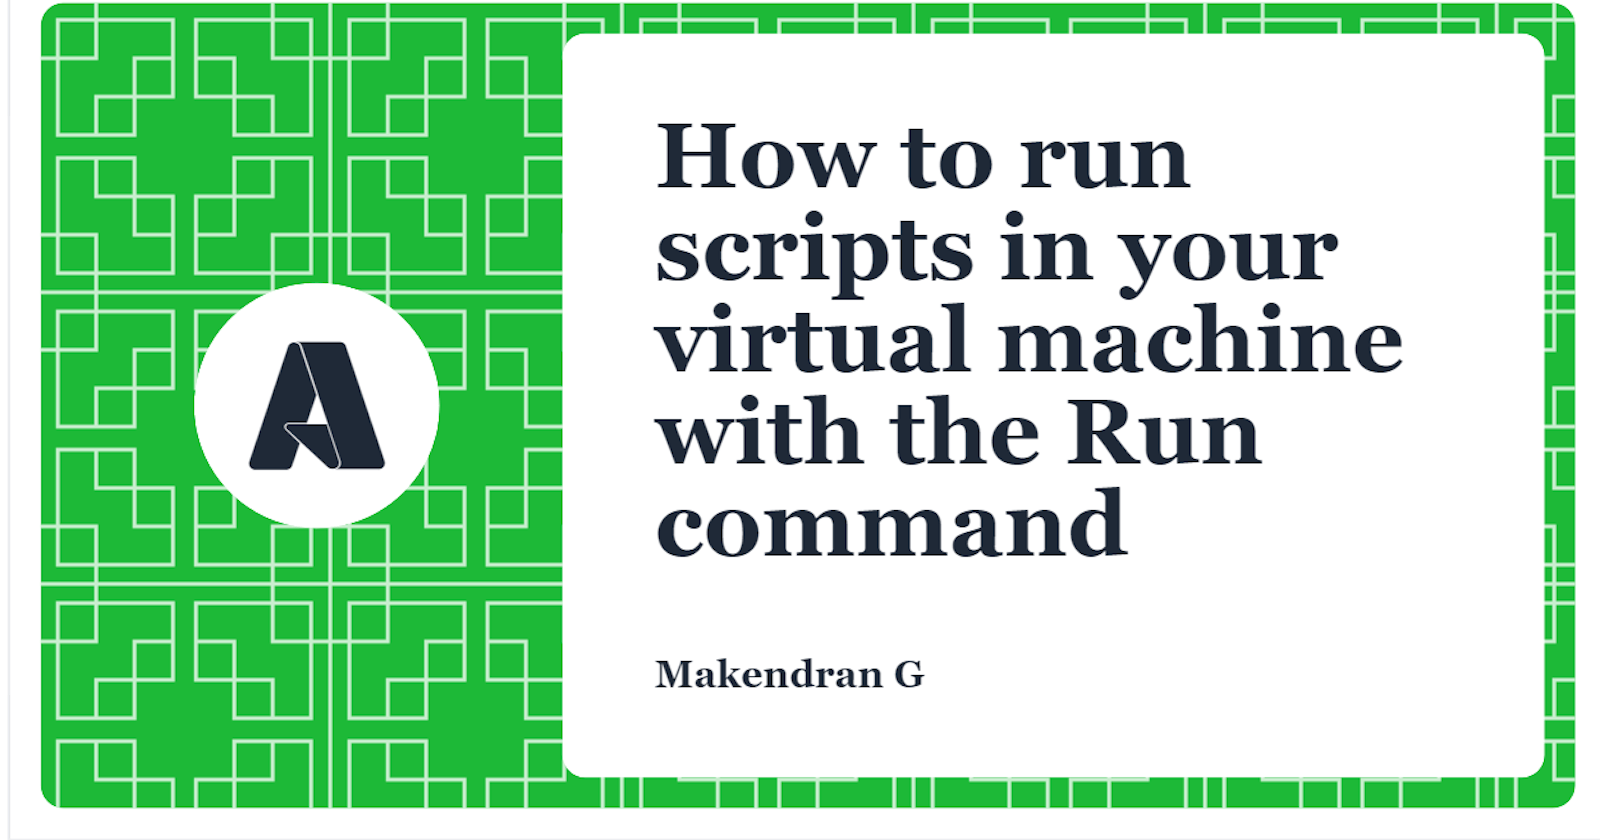 How to run scripts in your virtual machine with the Run command